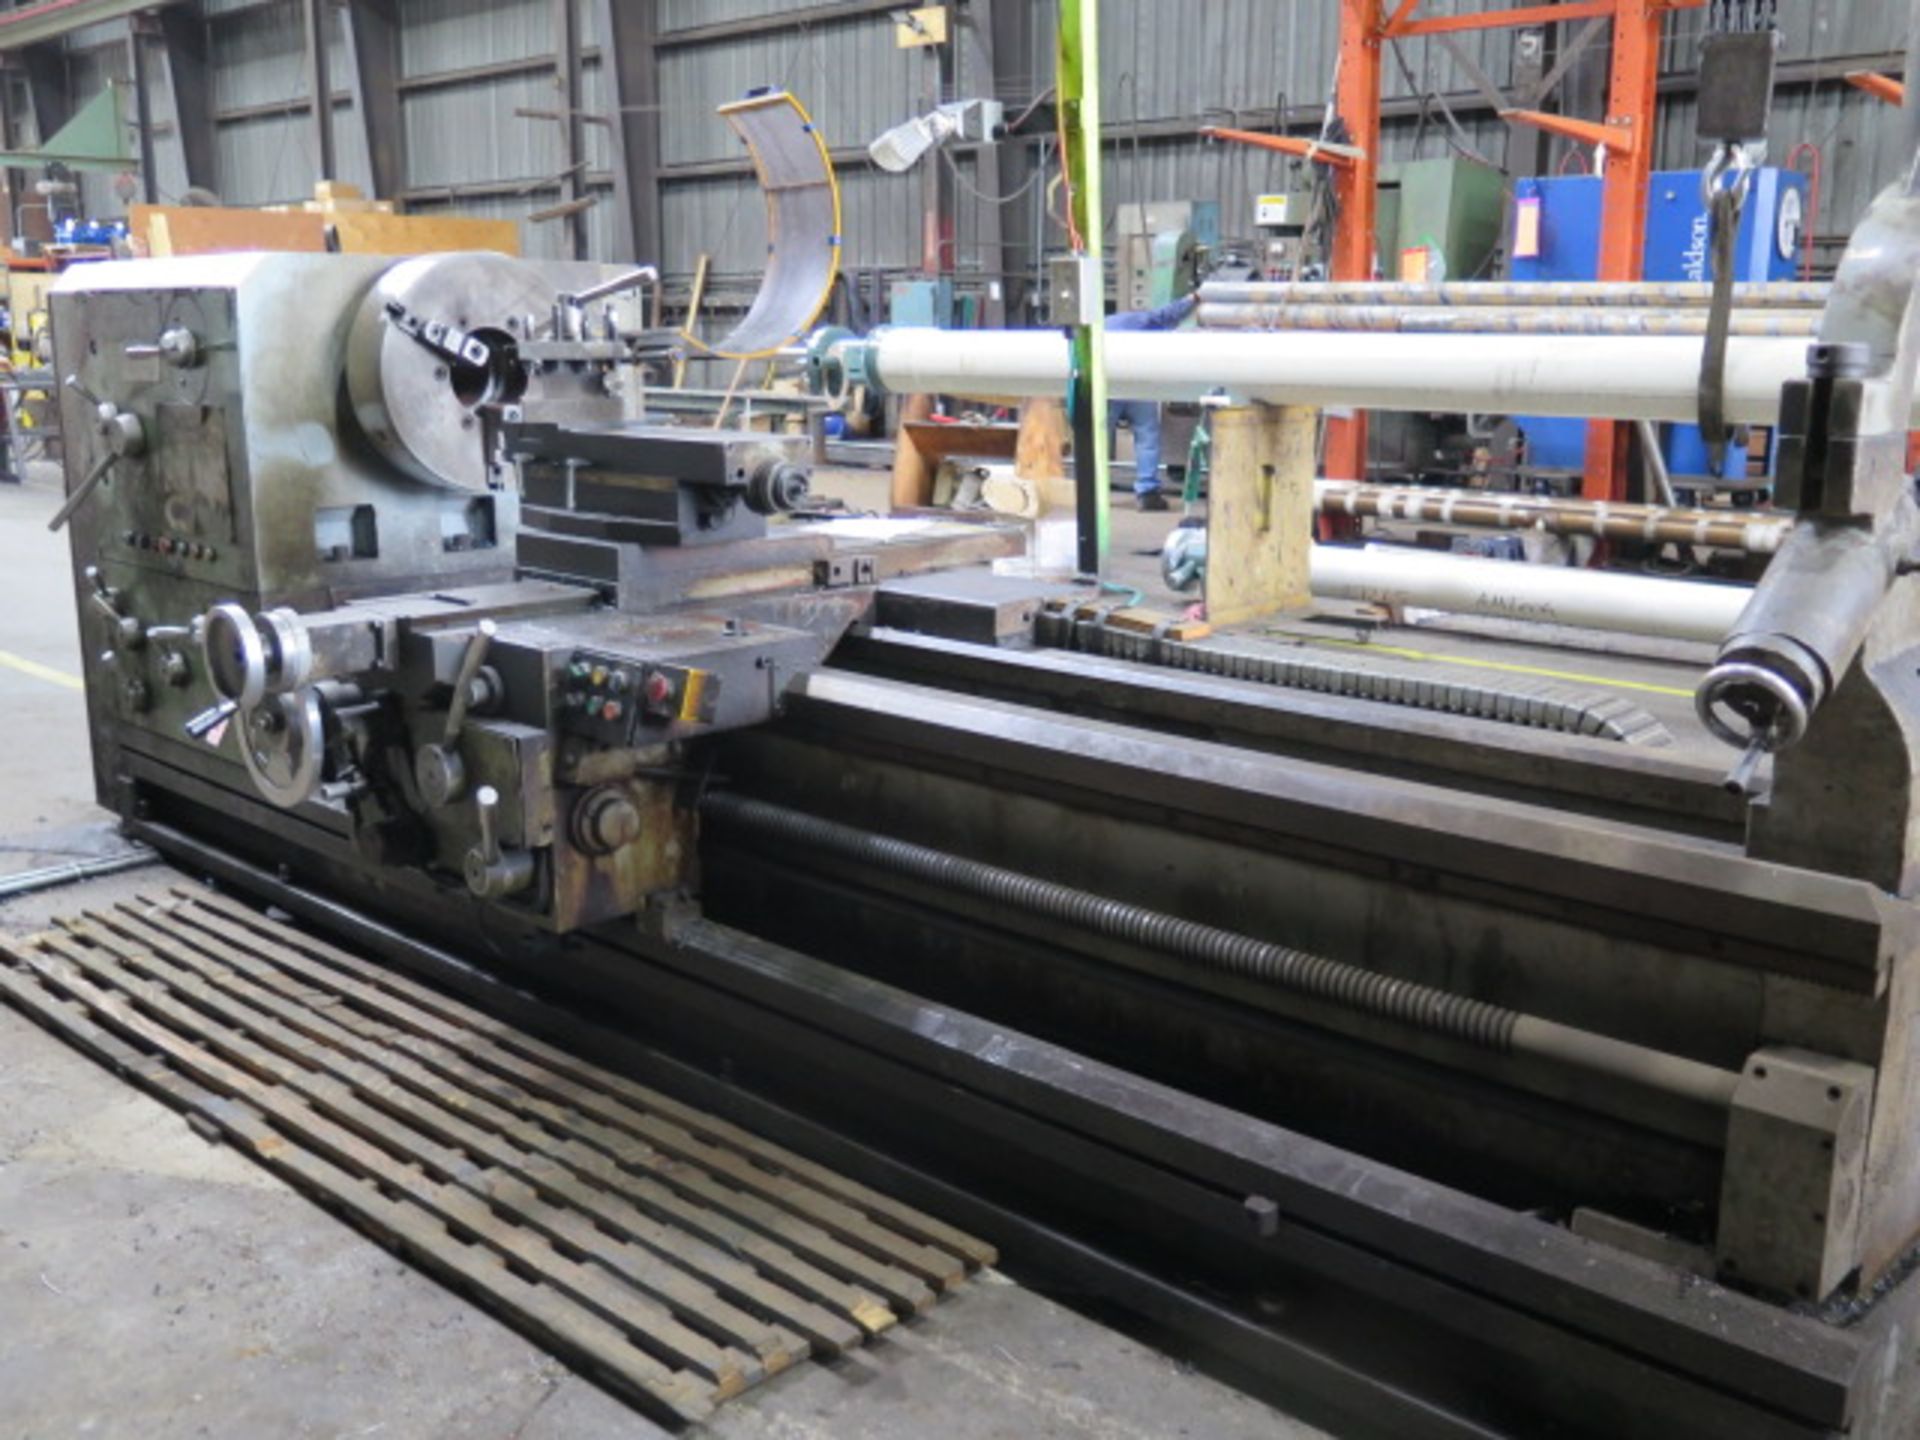 American Turnmaster HT-3580 35” x 80” Big Bore Geared Gap Bed Lathe w/ 6” Spindle Bore, SOLD AS IS - Image 3 of 15